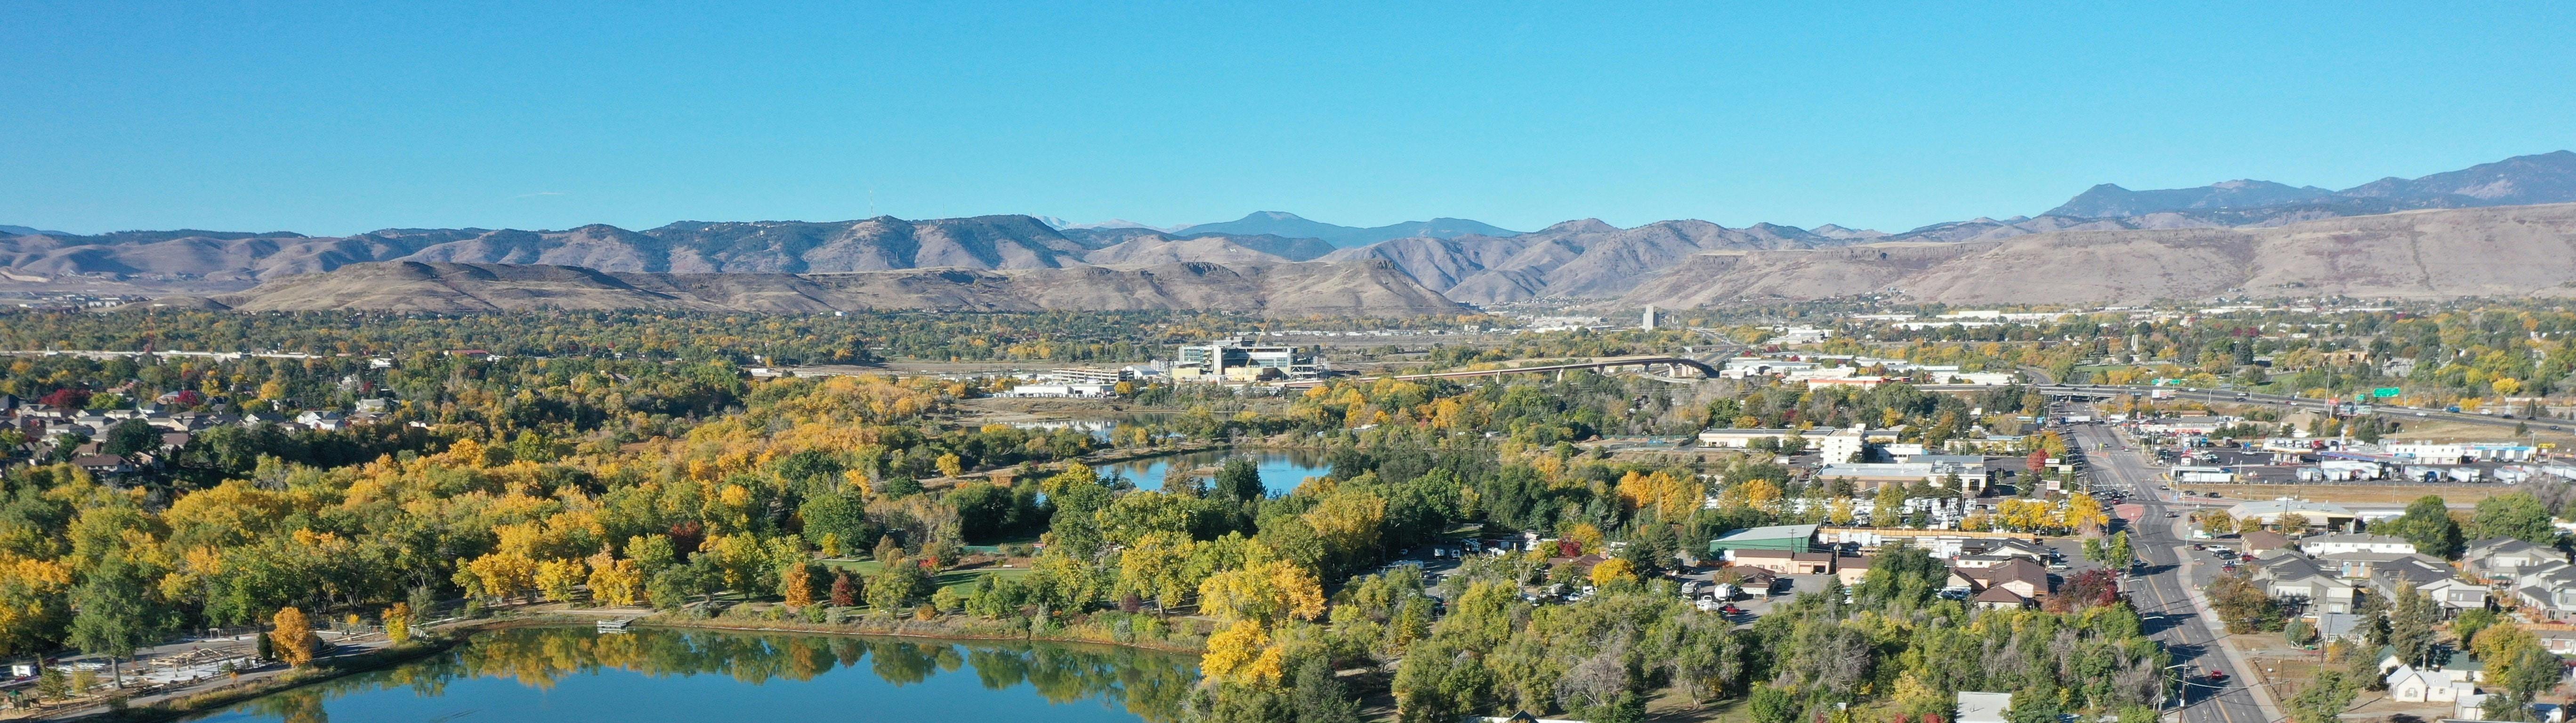 Aerial image of Wheat Ridge  with trees and buildings in the foreground and the Front Range mountains in the background